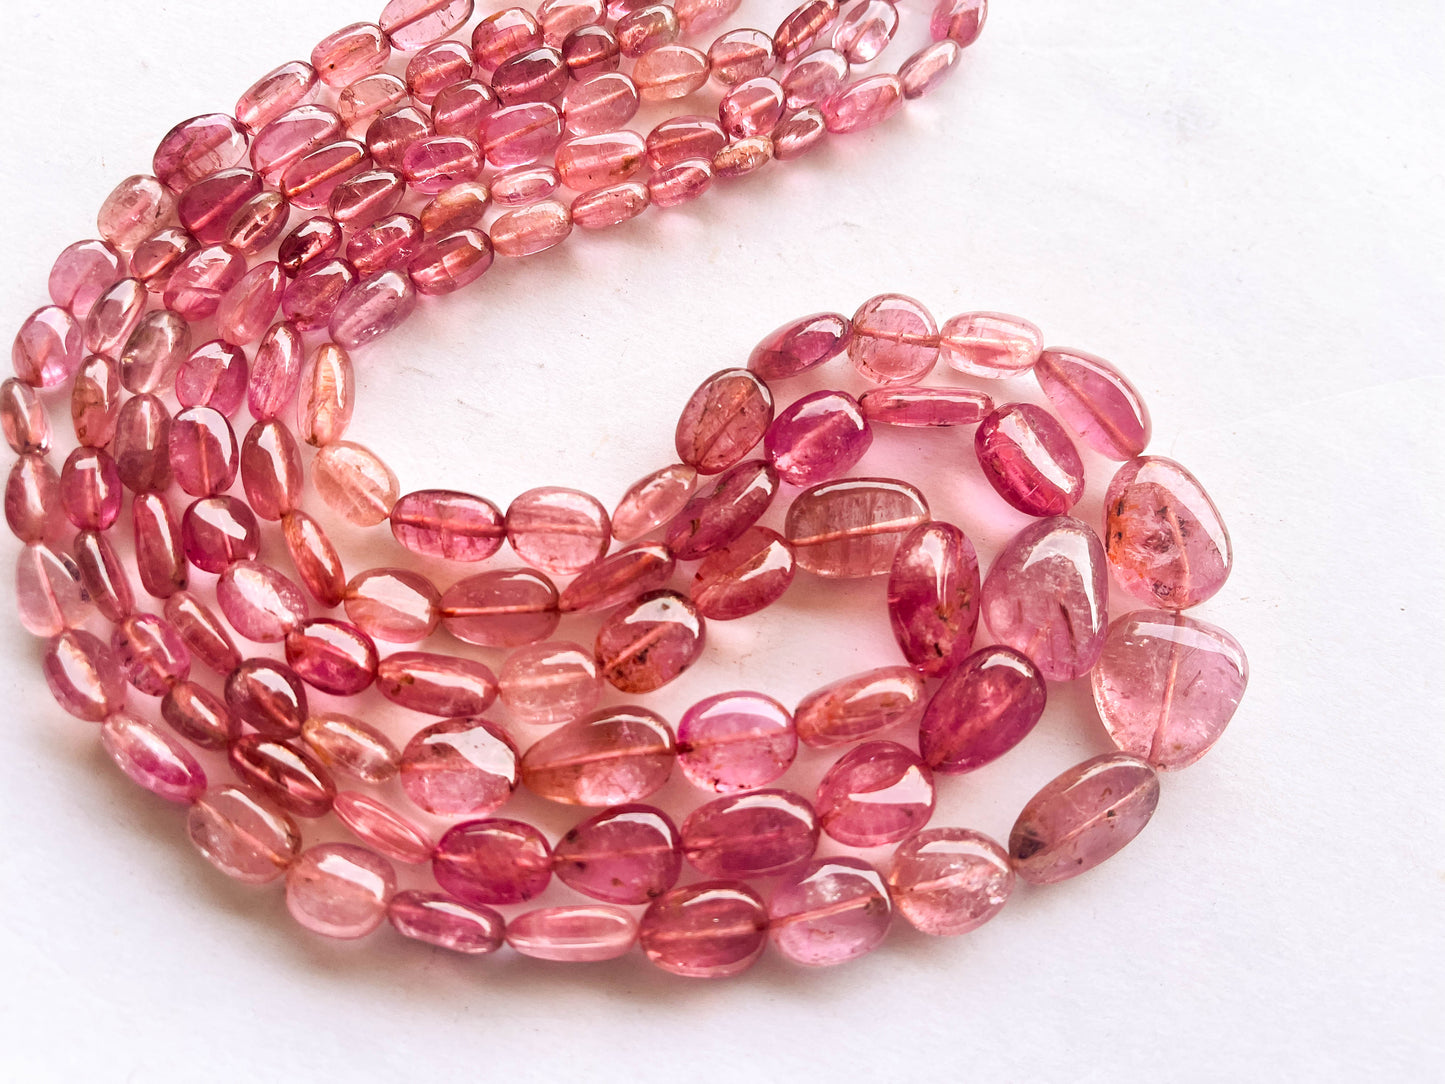 Natural Pink Tourmaline Smooth Tumble or Nuggets Shape Beads | 16 Inch Beadsforyourjewelry